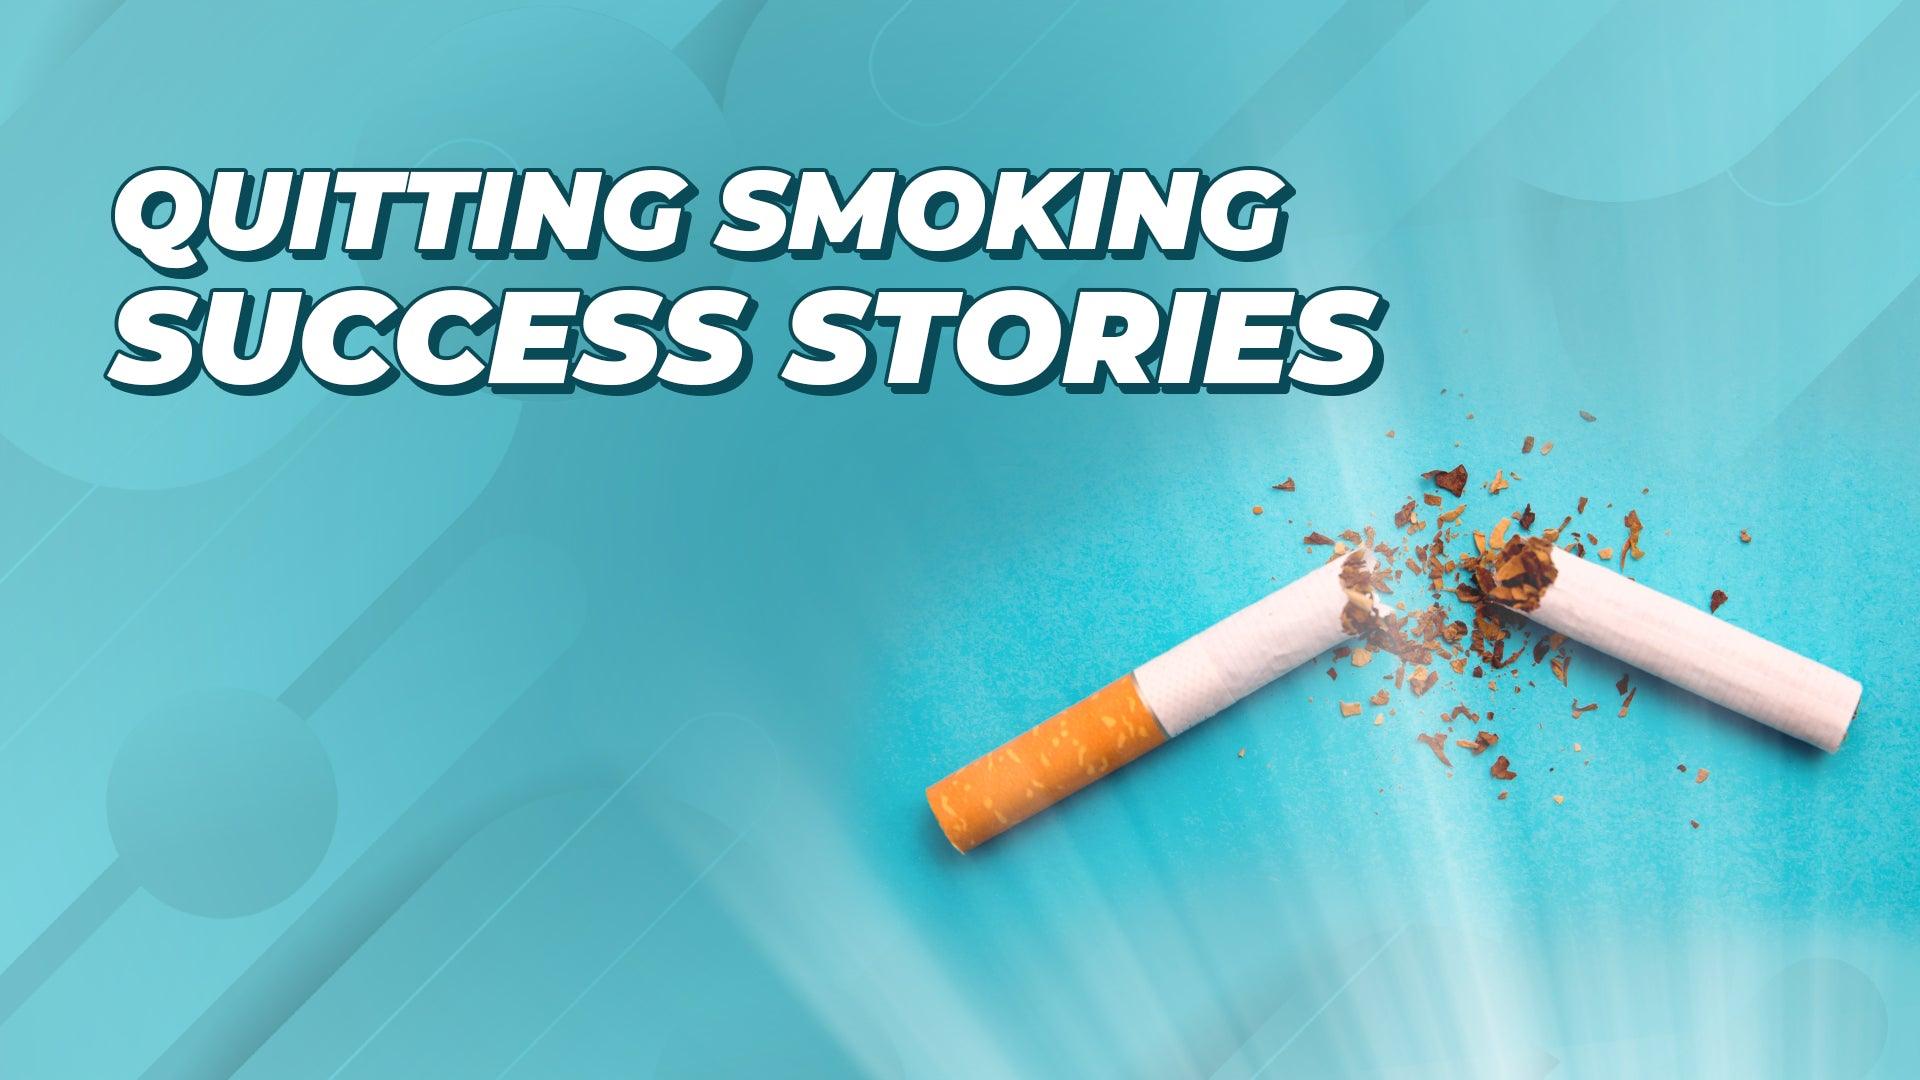 Quitting Smoking: Success Stories - Category:Health, Sub Category:Quit Smoking